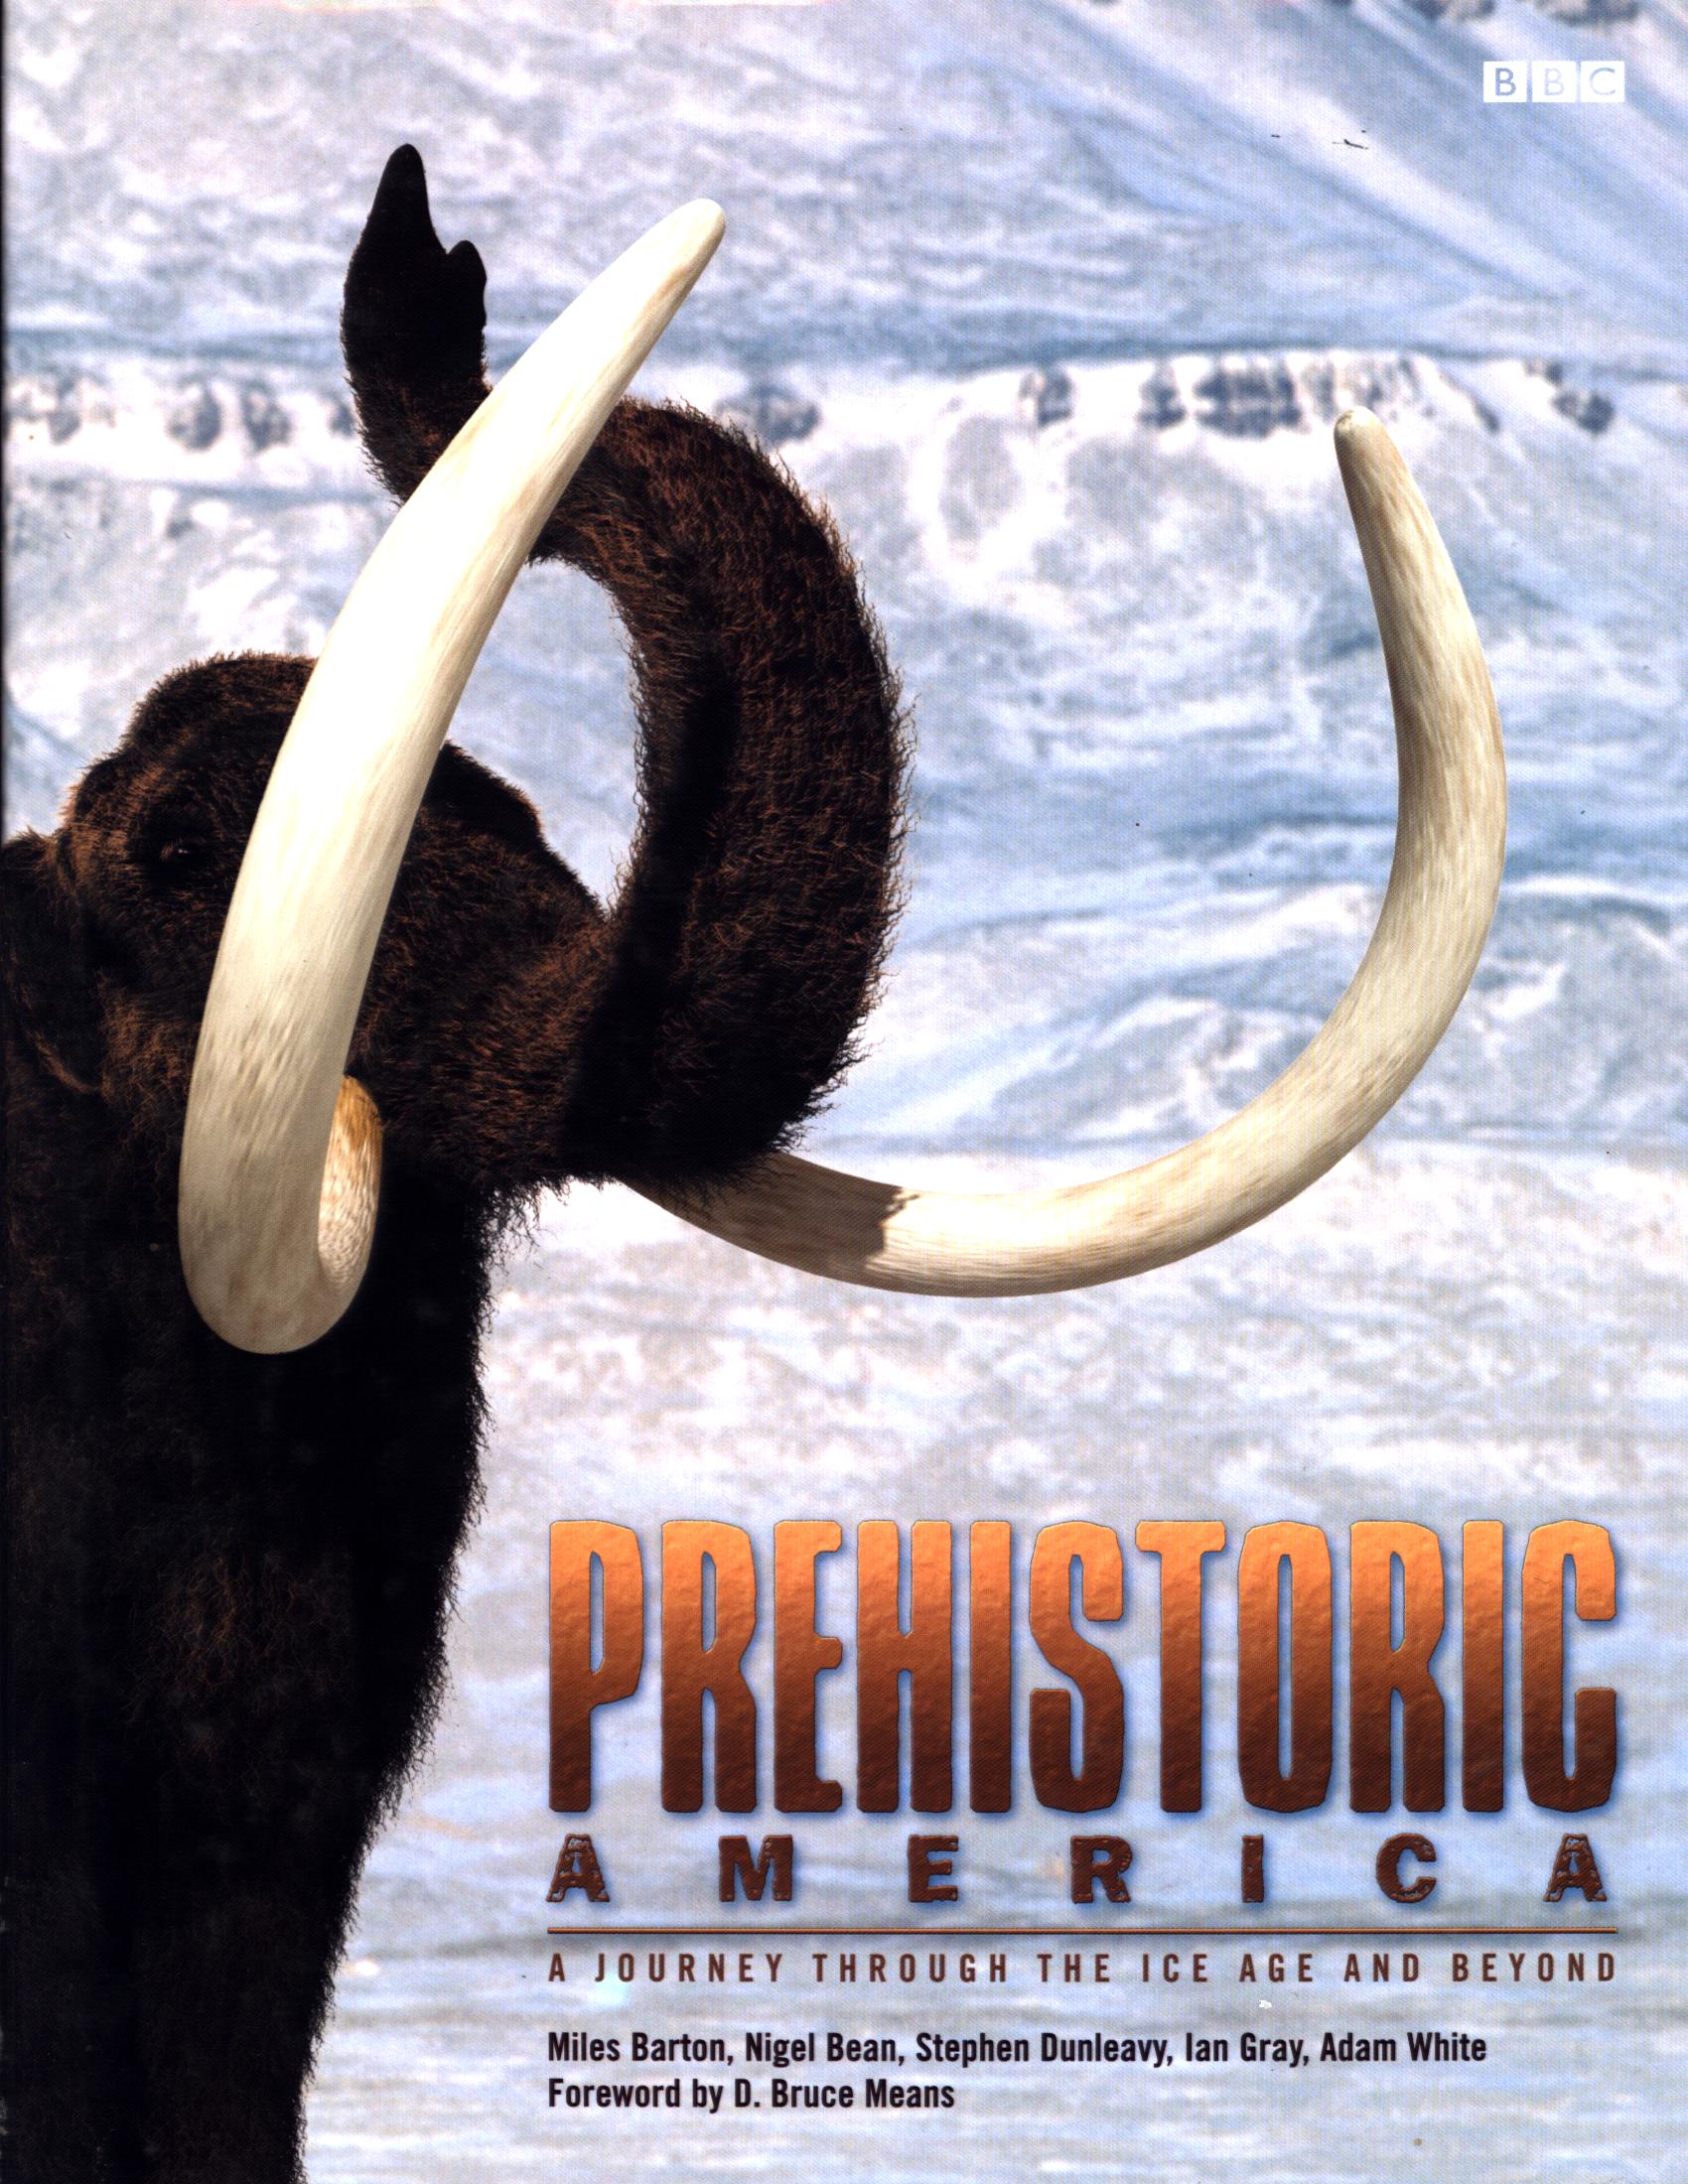 PREHISTORIC AMERICA: a journey through the Ice Age and beyond.